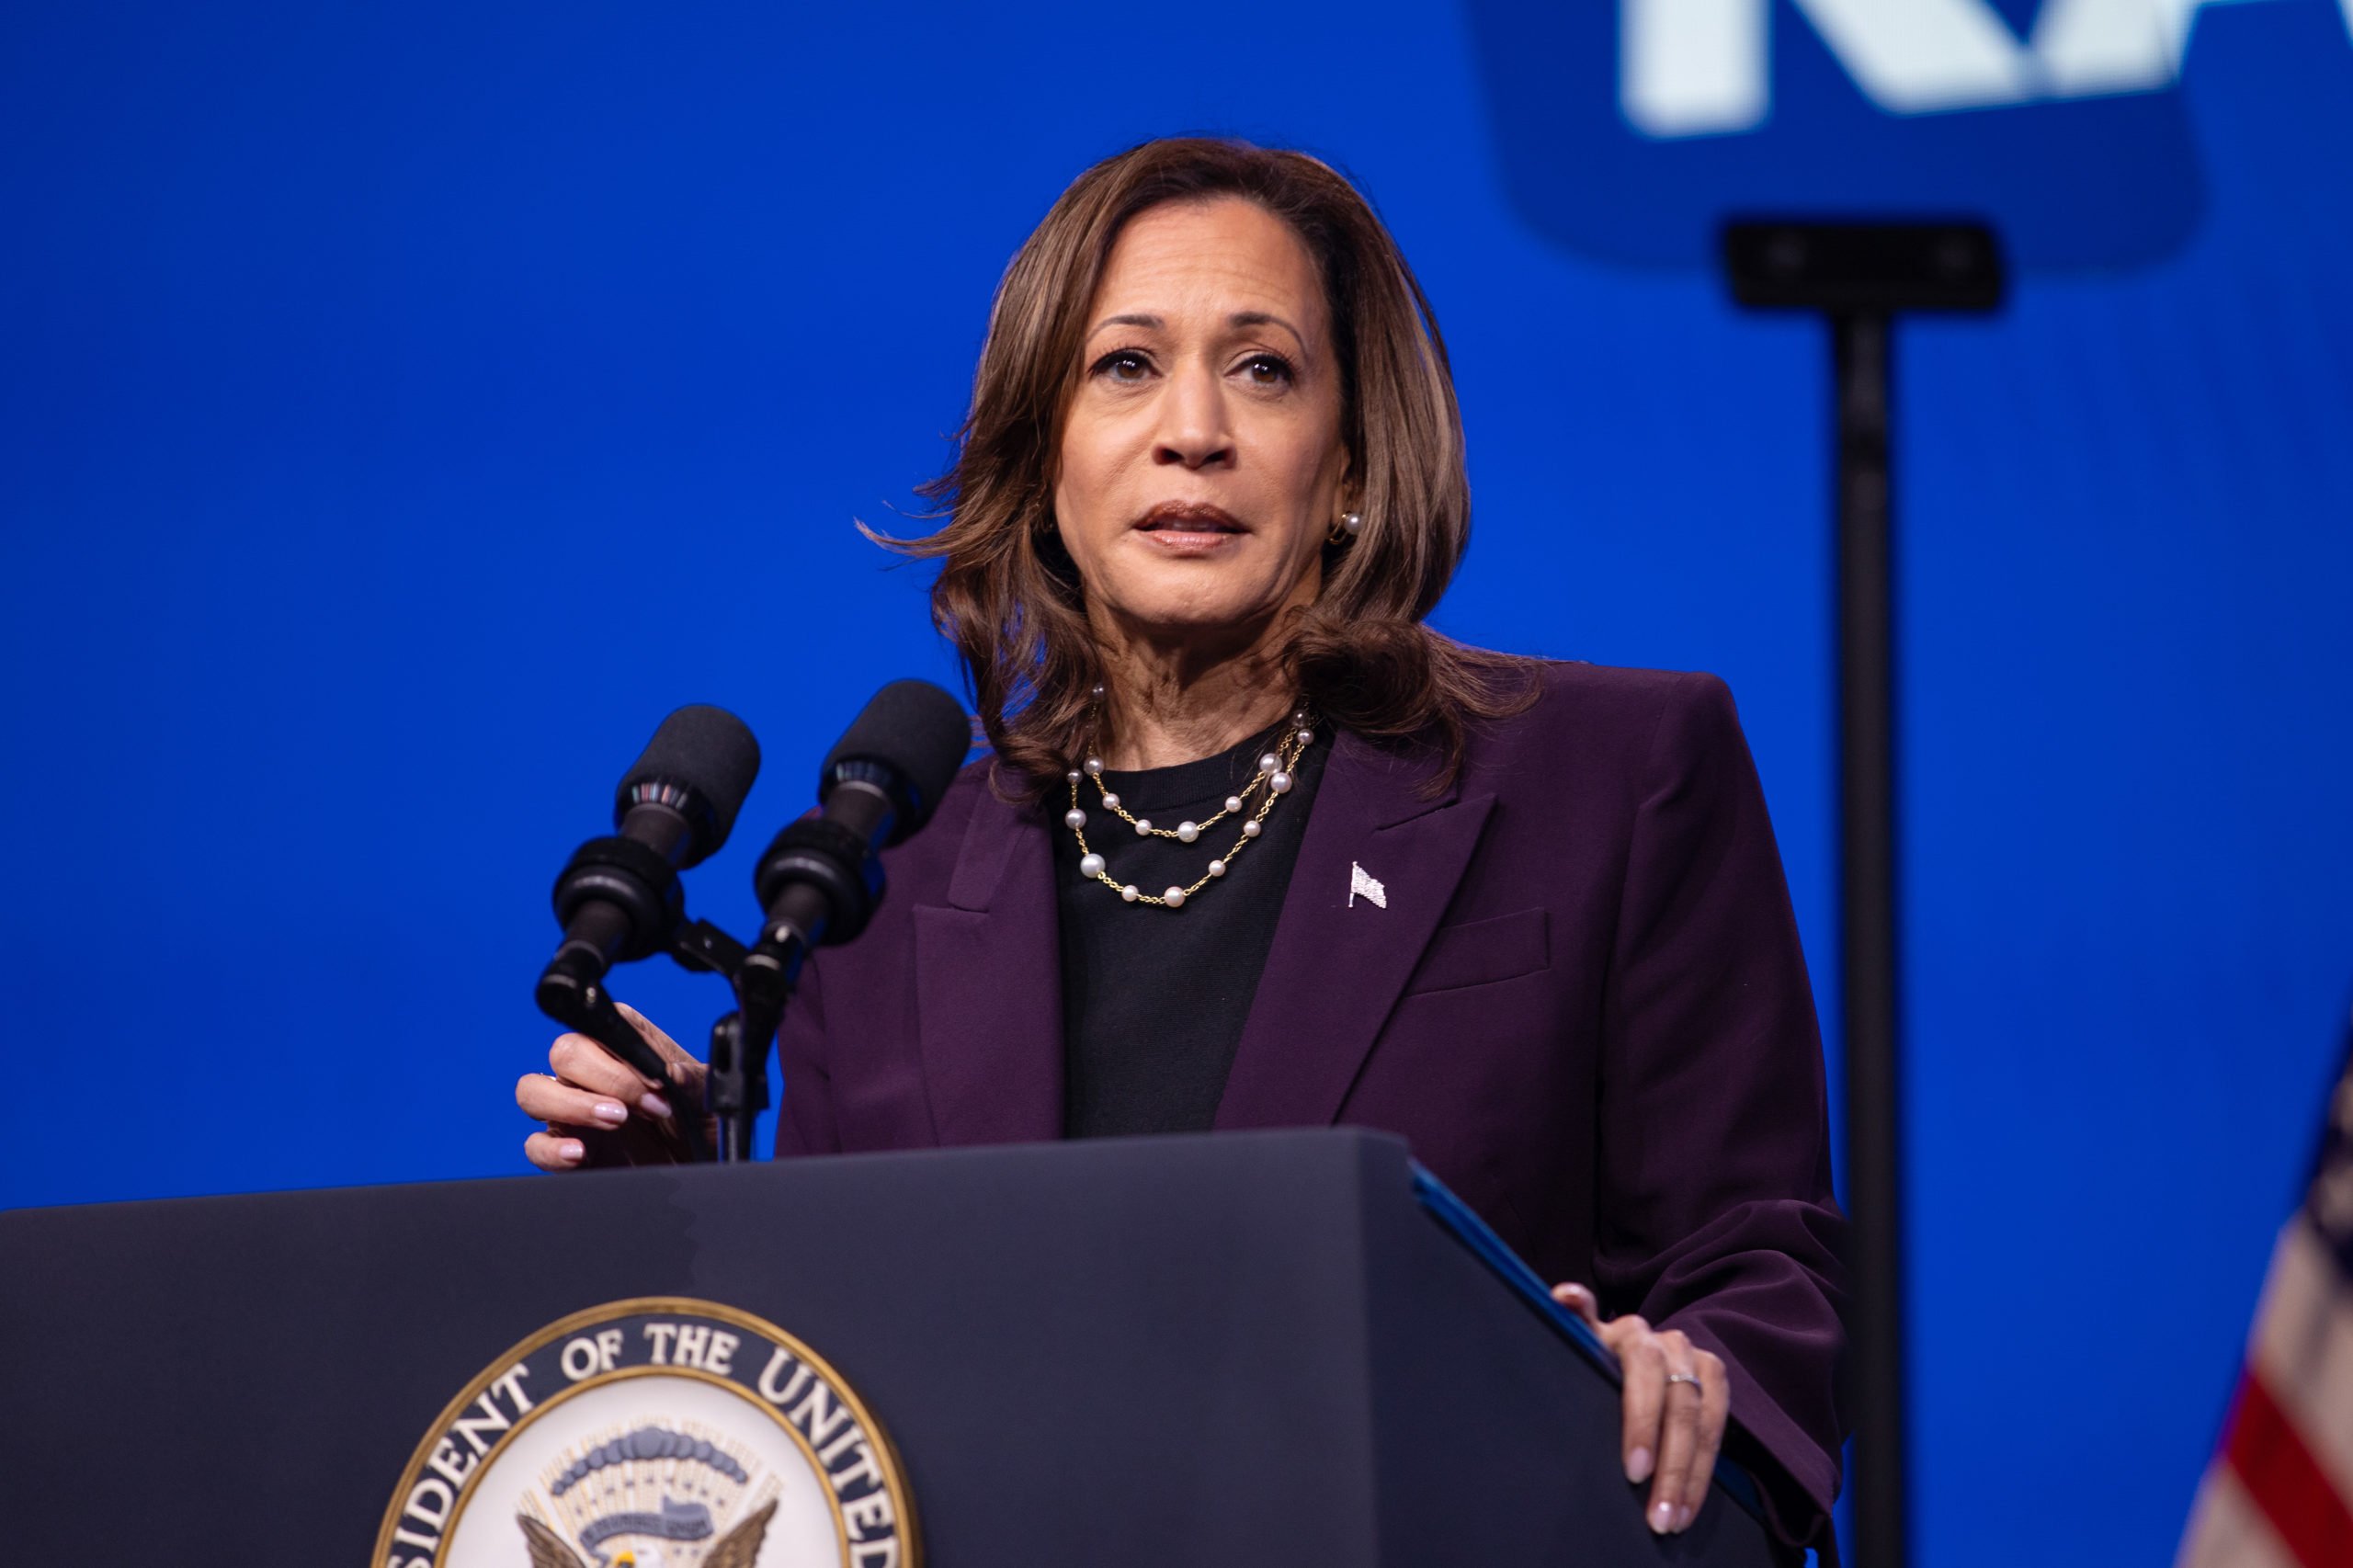 HOUSTON, TEXAS - JULY 25: Vice President Kamala Harris speaks at the American Federation of Teachers' 88th National Convention on July 25, 2024 in Houston, Texas. The American Federation of Teachers is the first labor union to endorse Harris for president since announcing her campaign. (Photo by Montinique Monroe/Getty Images)